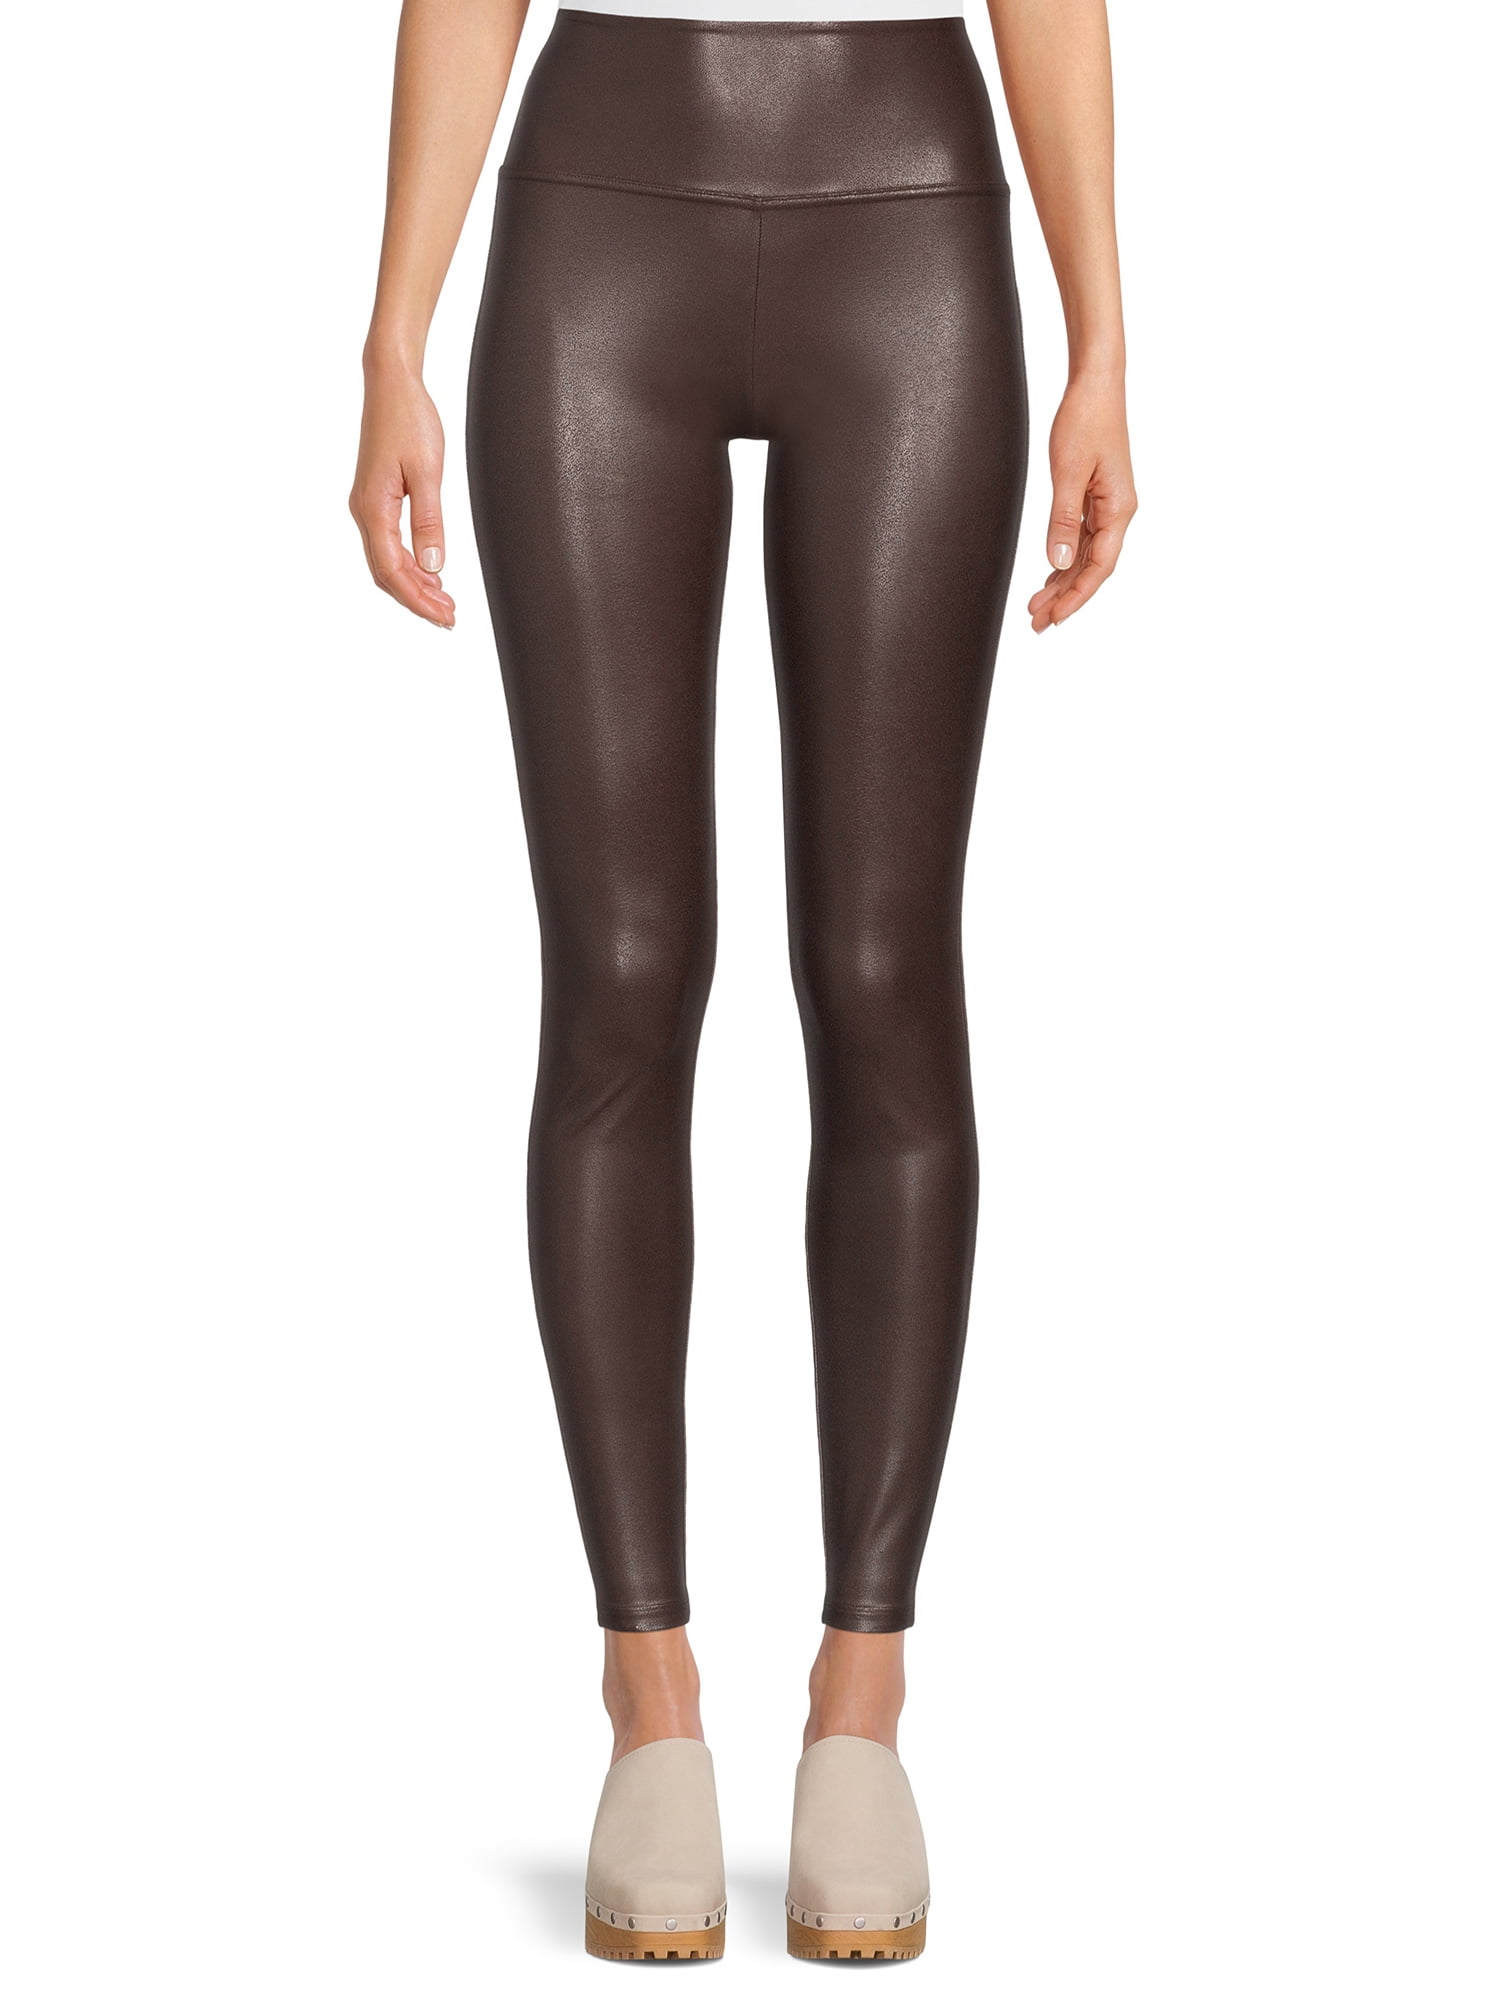 TIME AND TRU Women's Faux Leather Leggings Sz S 4-6 Brown (New